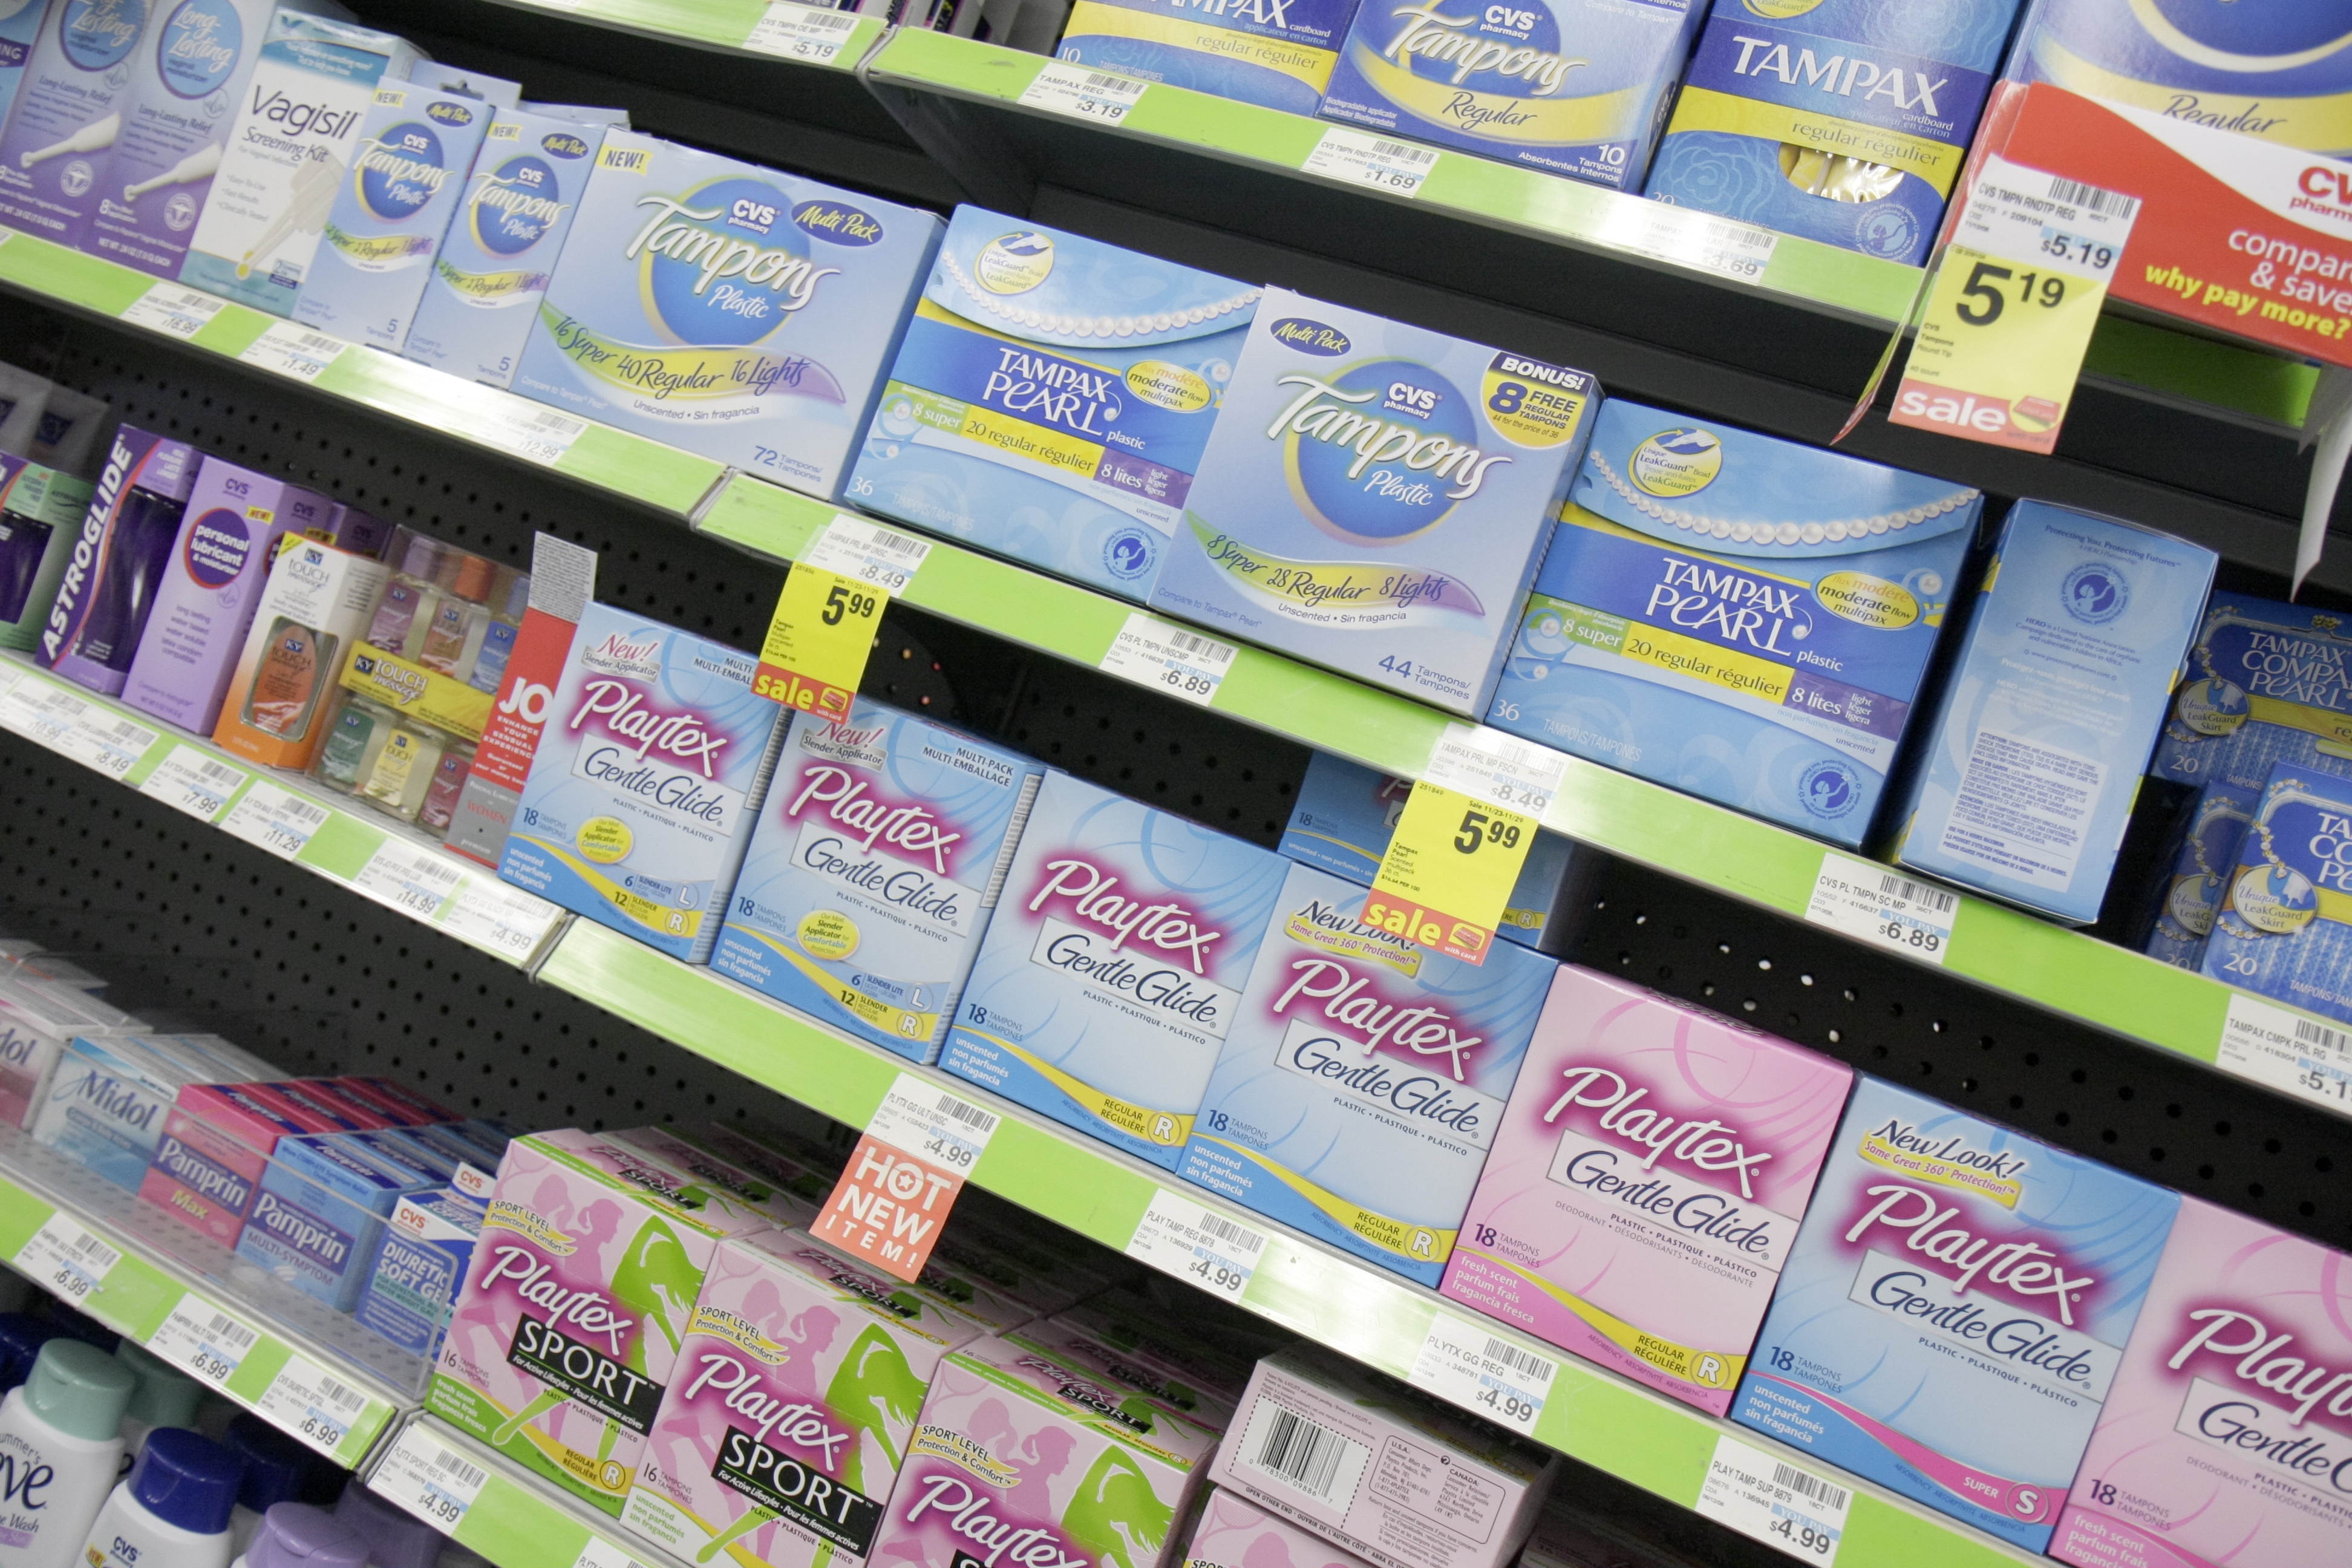 California Requires Menstrual Products In Public Schools - Times News Express